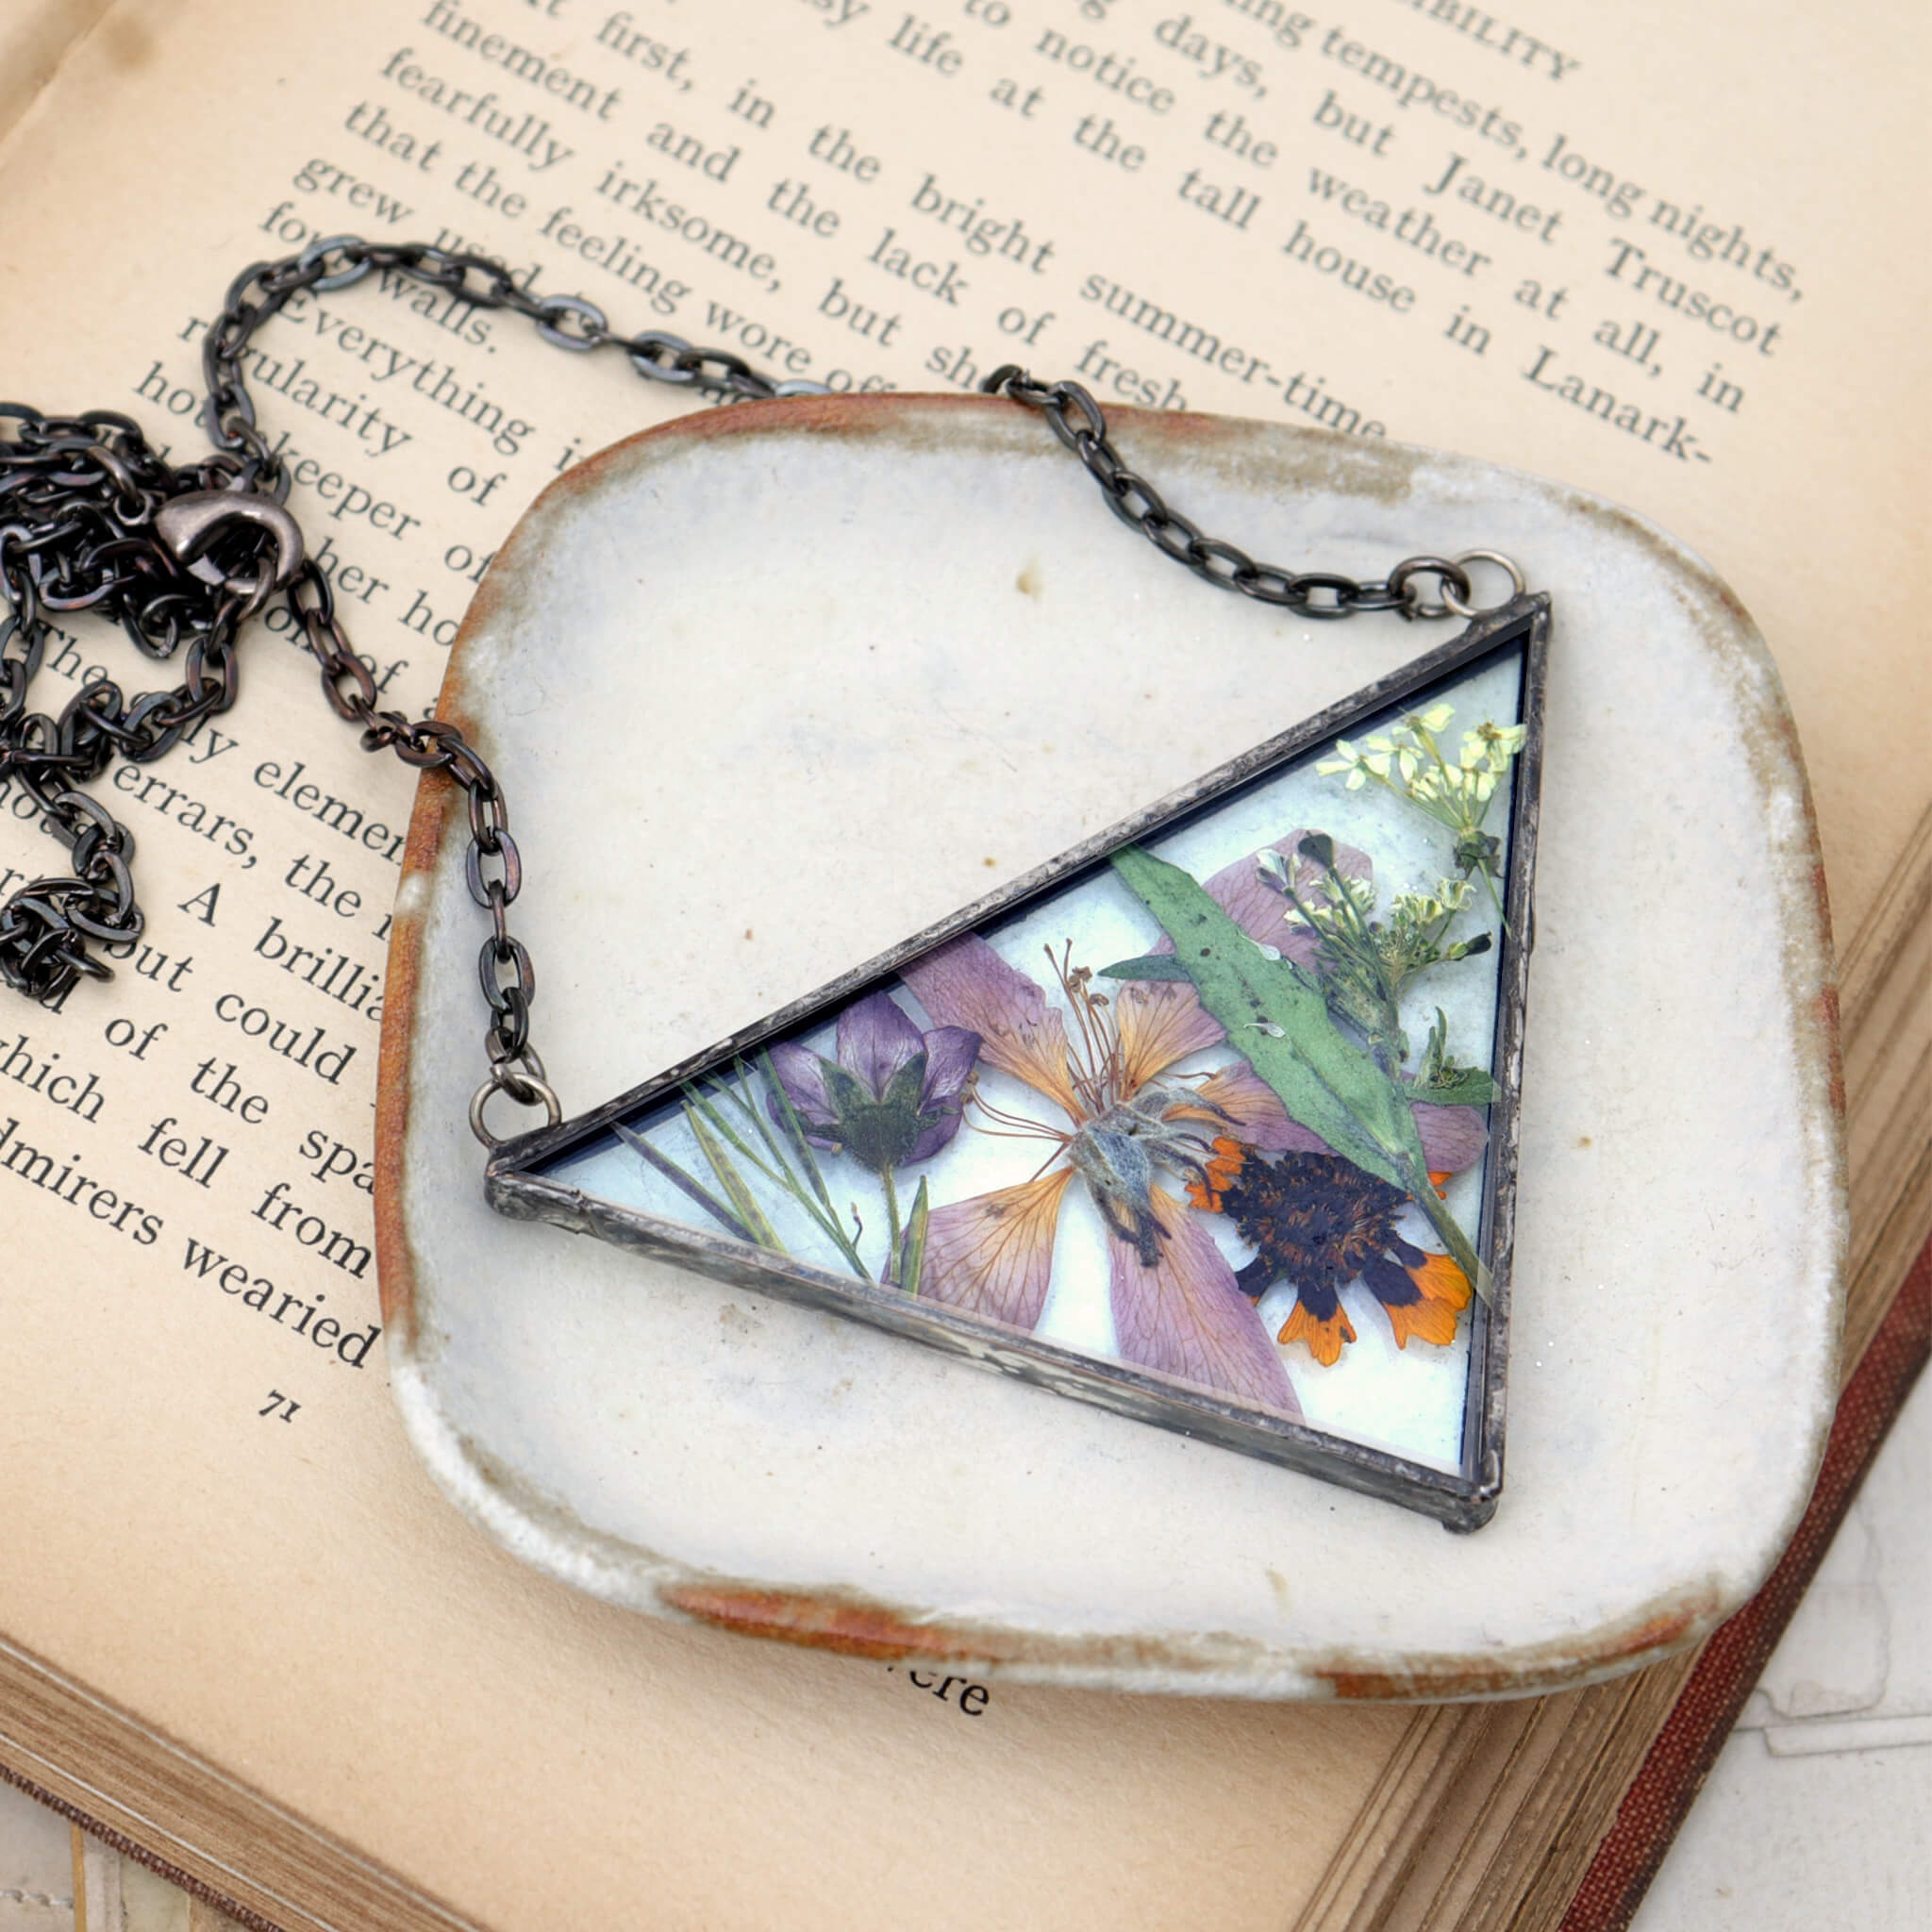 Necklace of a mix of pressed flowers in triangular soldered glass lying on a white dish